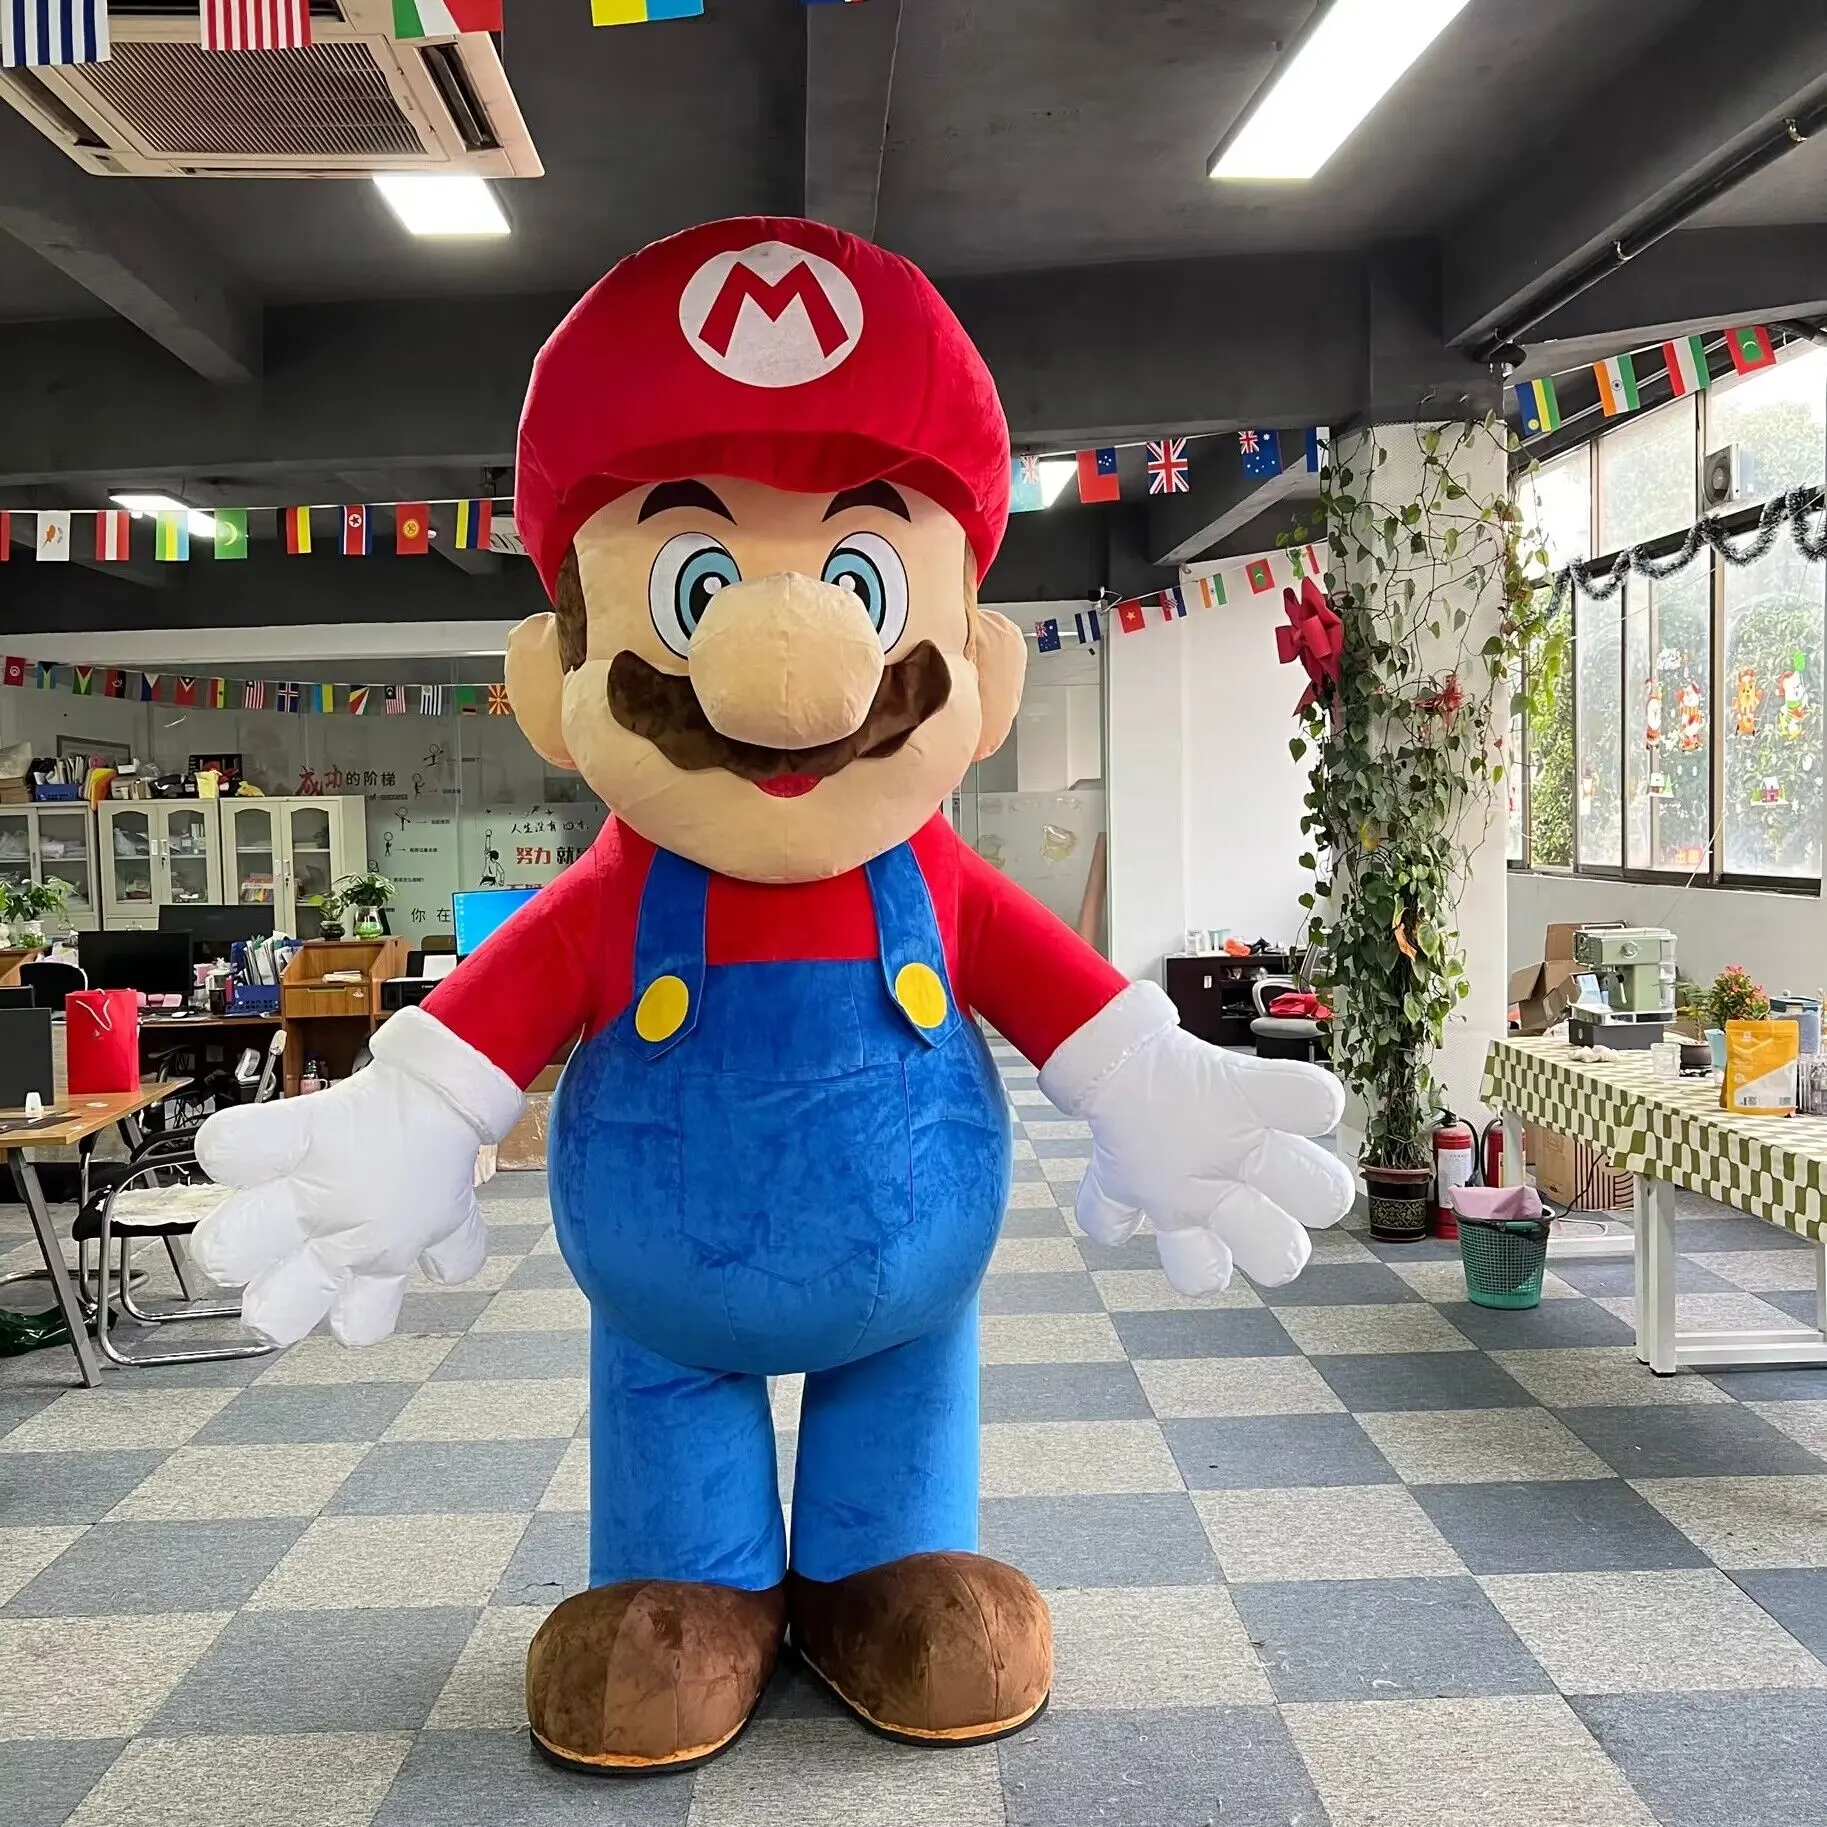 Funtoys MOQ 1 PIECE inflatable cartoon character super mario mascot costume for sale super mario costumes for holiday event